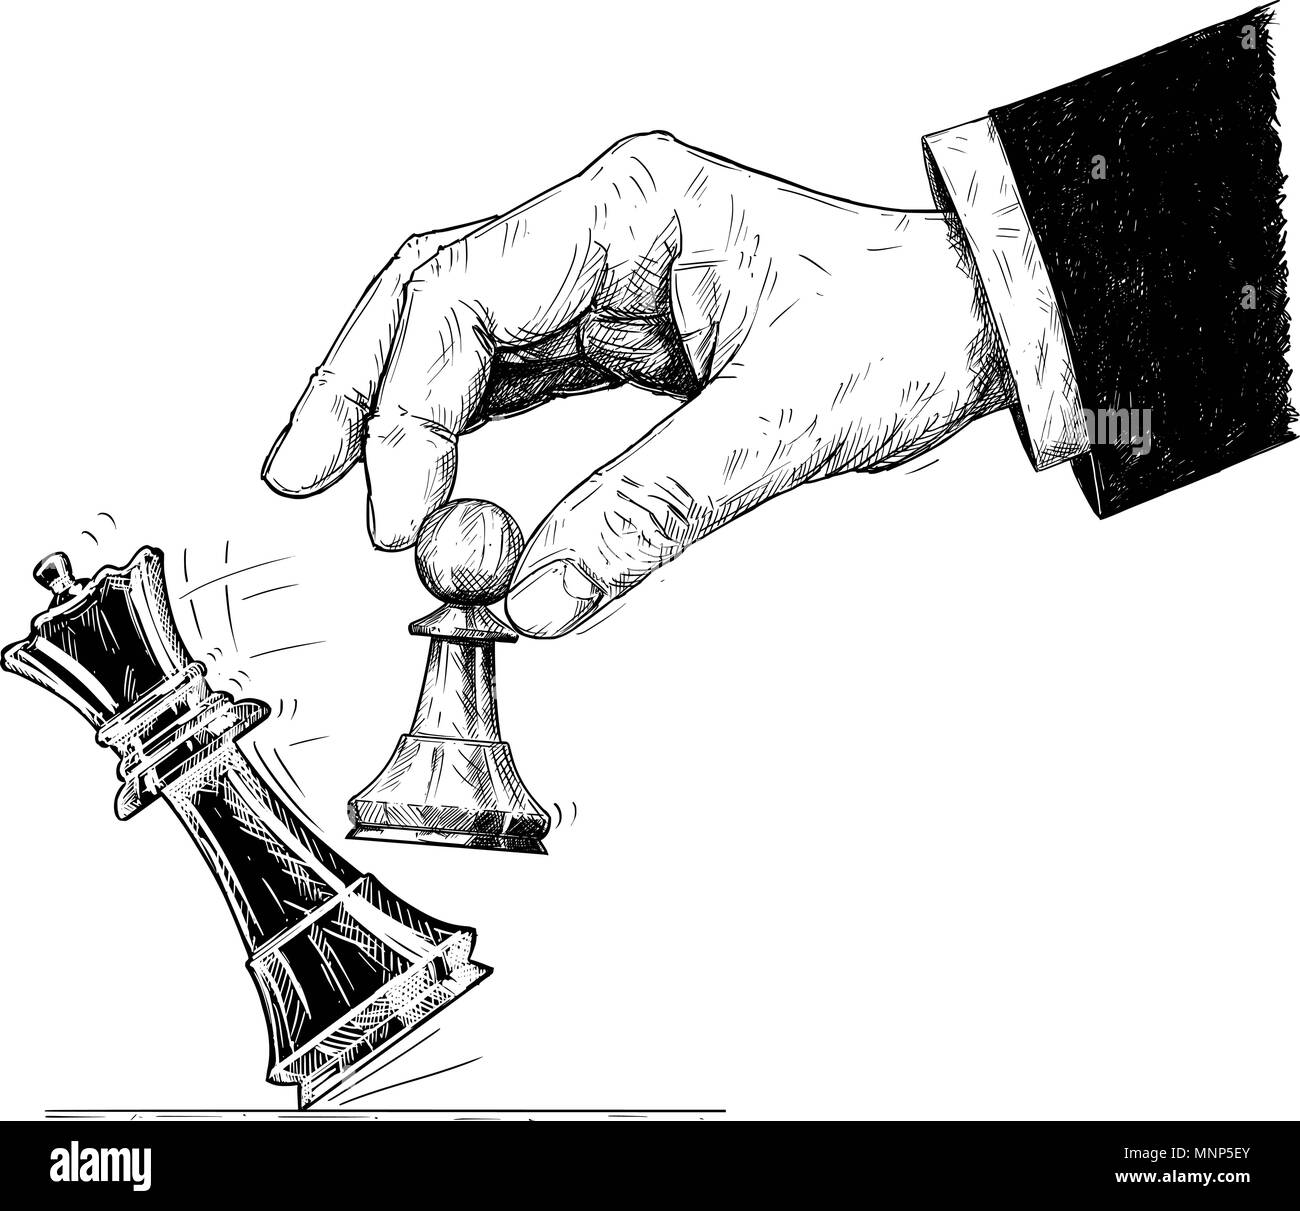 Vector Artistic Drawing Illustration of Hand Holding Chess Pawn and Knocking Down King. Checkmate. Stock Vector